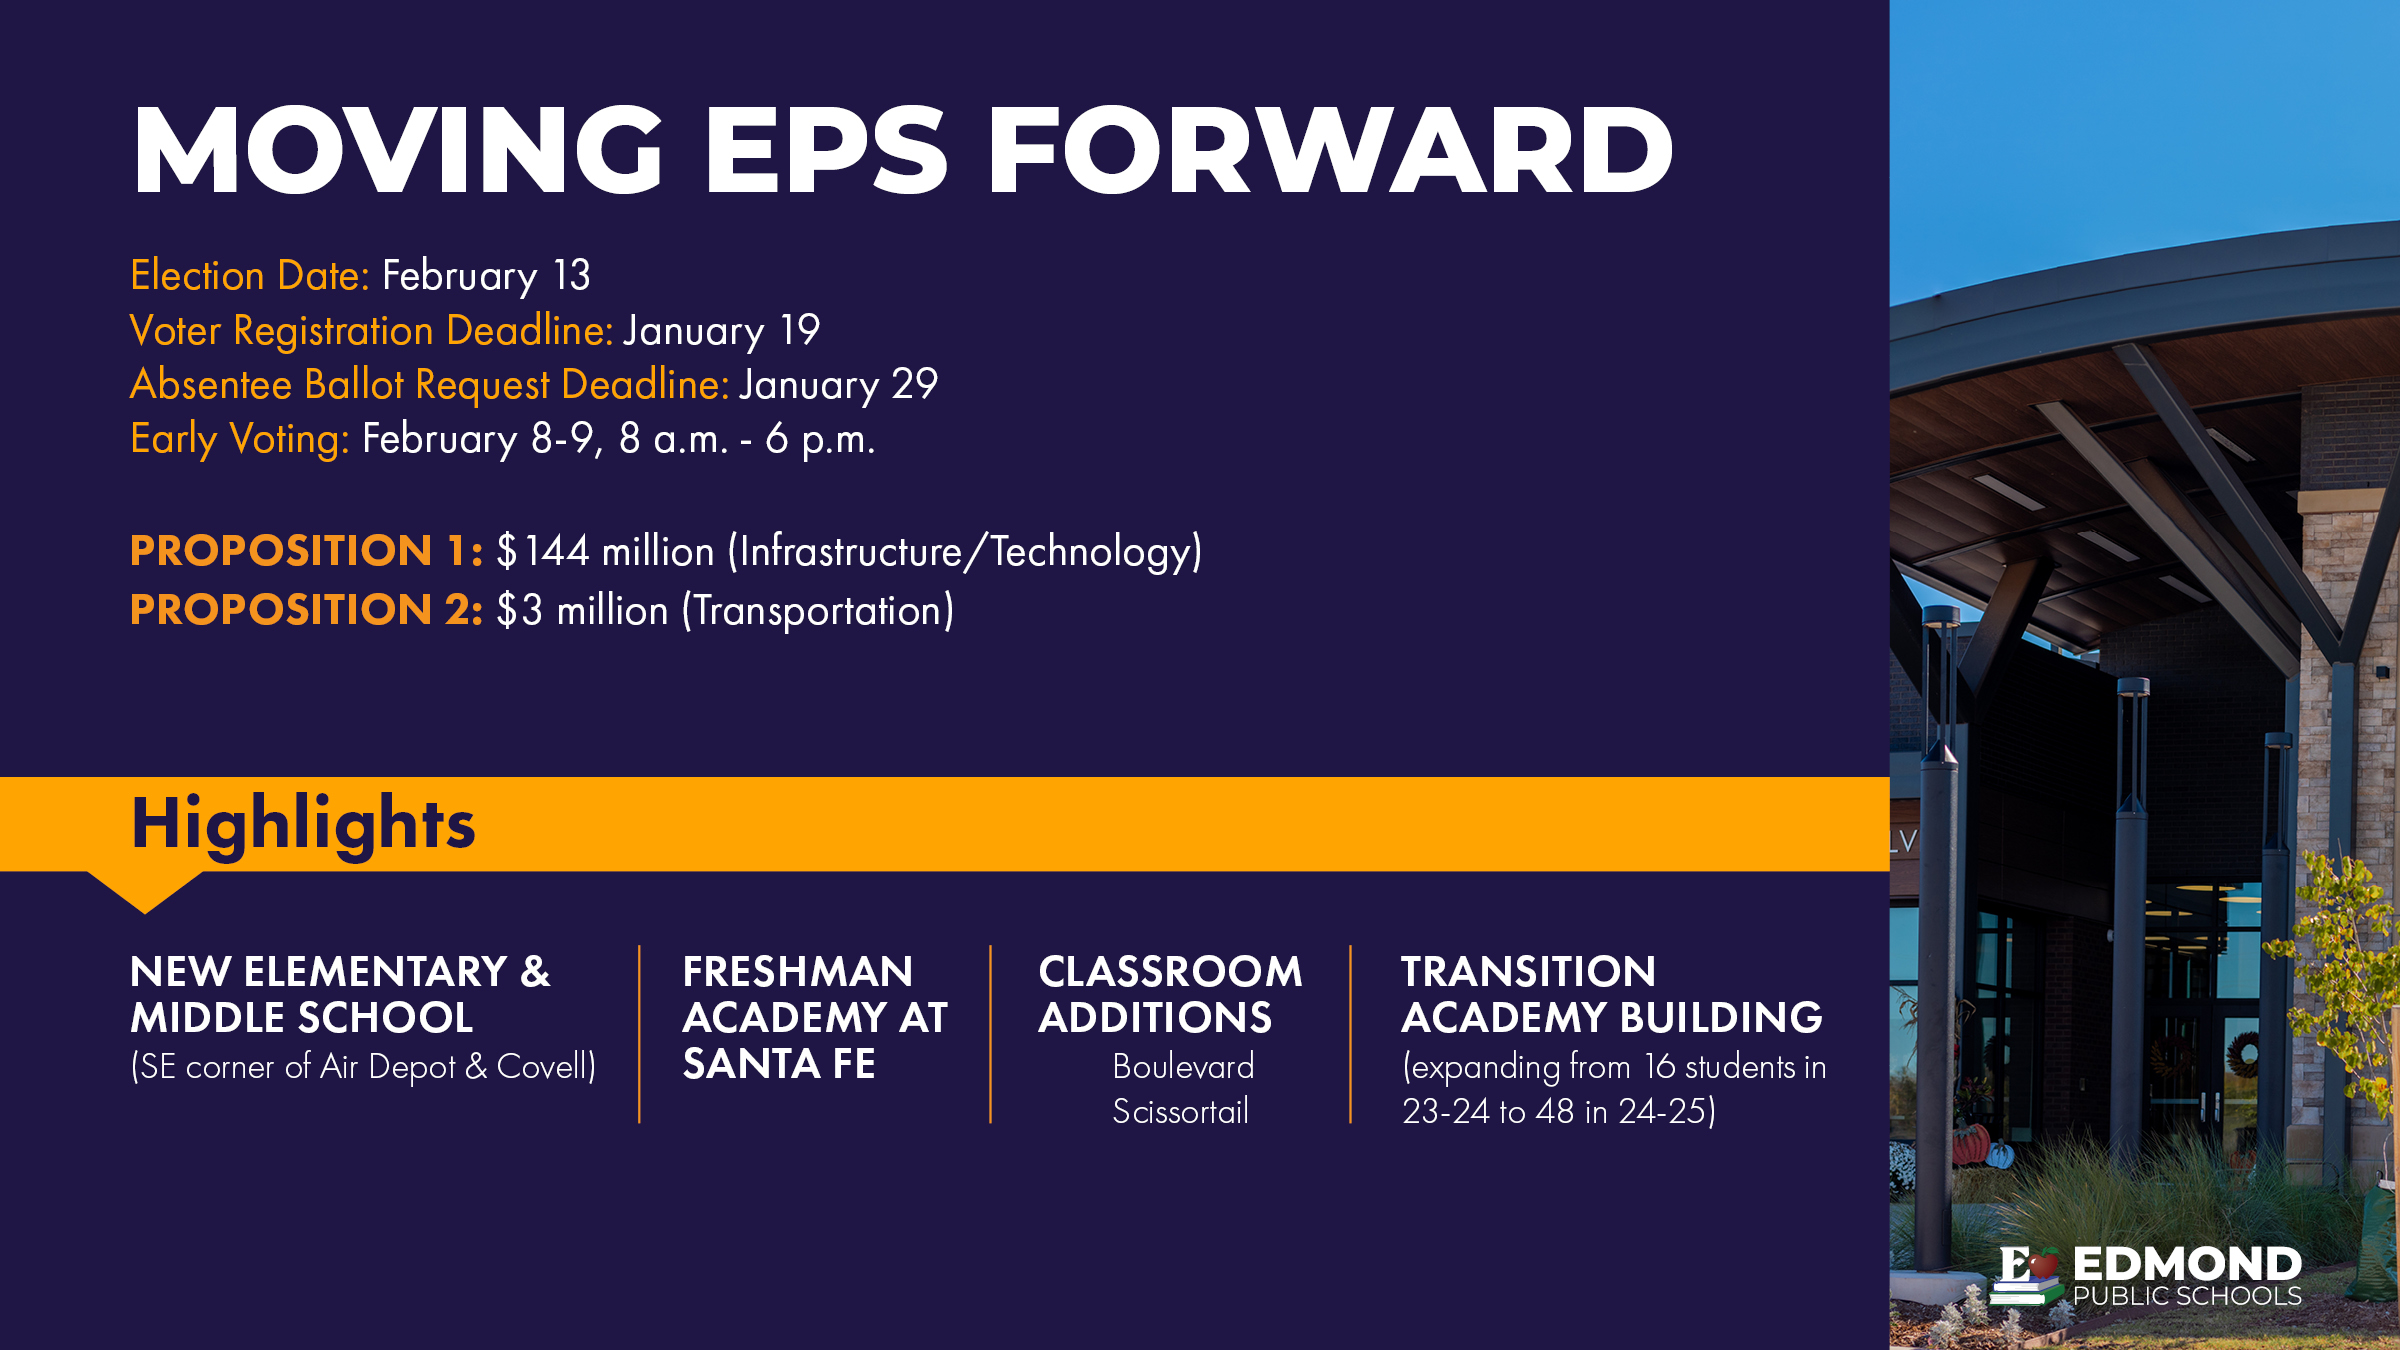 MOVING EPS FORWARD Election Date: February 13 Voter Registration Deadline: January 19 Absentee Ballot Request Deadline: January 29 Early Voting: February 8-9, 8 a.m. - 6 p.m. PROPOSITION 1: $144 million (Infrastructure/Technology) PROPOSITION 2: $3 million (Transportation) Highlights NEW ELEMENTARY & MIDDLE SCHOOL (SE corner of Air Depot & Covell) FRESHMAN ACADEMY AT SANTA FE CLASSROOM ADDITIONS Boulevard Scissortail TRANSITION ACADEMY BUILDING (expanding from 16 students in 23-24 to 48 in